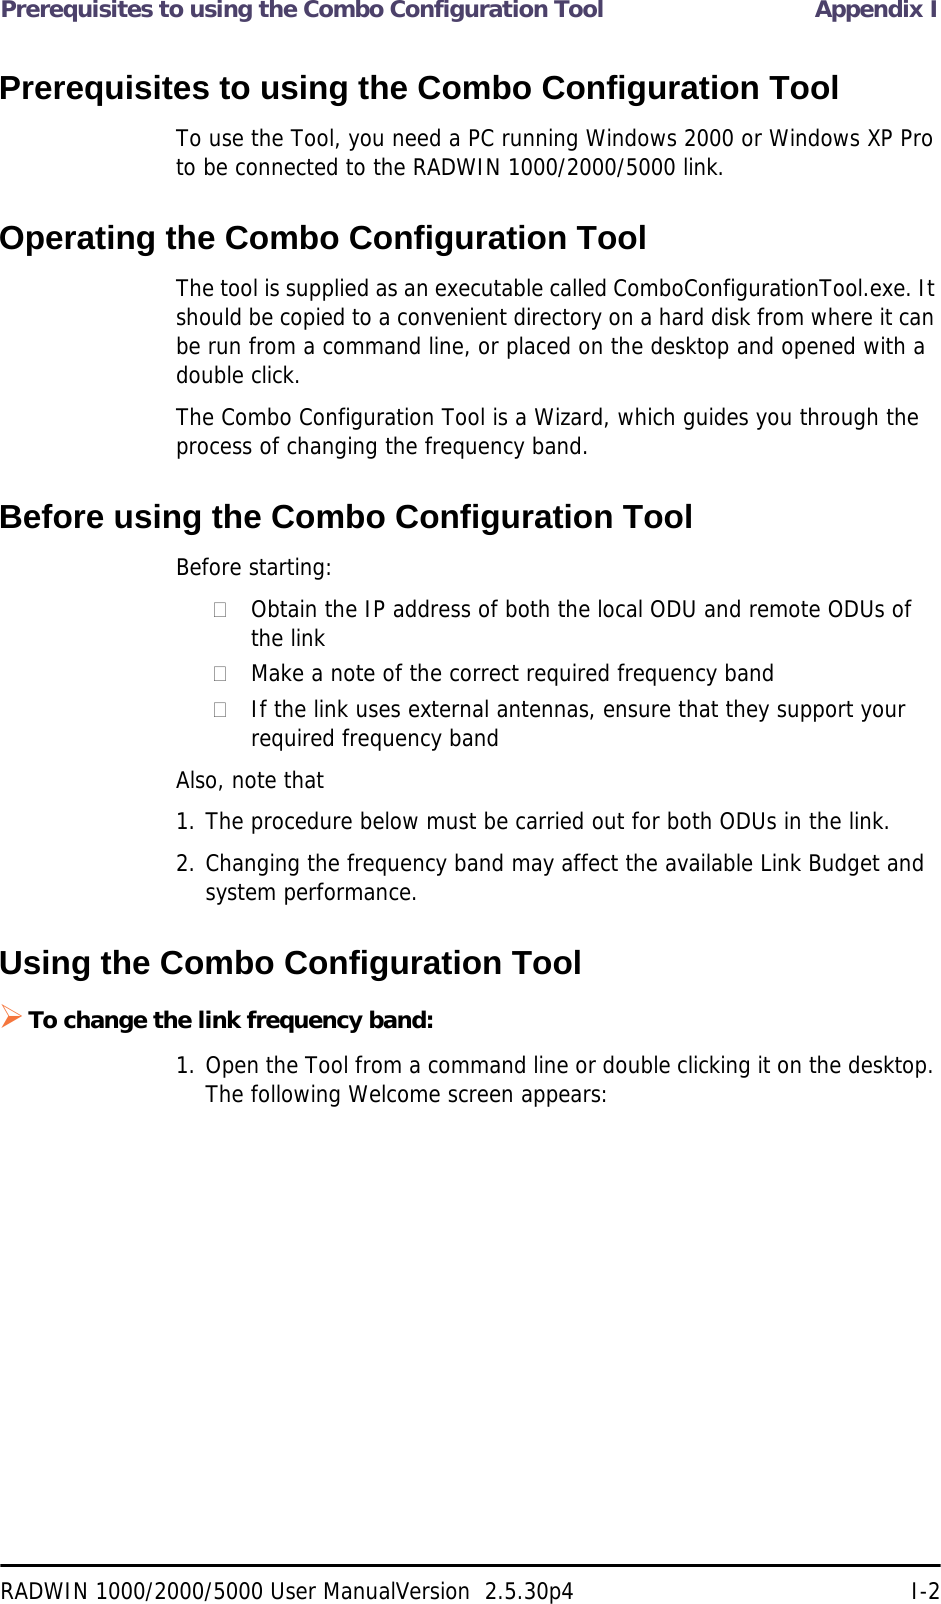 Prerequisites to using the Combo Configuration Tool Appendix IRADWIN 1000/2000/5000 User ManualVersion  2.5.30p4 I-2Prerequisites to using the Combo Configuration ToolTo use the Tool, you need a PC running Windows 2000 or Windows XP Pro to be connected to the RADWIN 1000/2000/5000 link.Operating the Combo Configuration ToolThe tool is supplied as an executable called ComboConfigurationTool.exe. It should be copied to a convenient directory on a hard disk from where it can be run from a command line, or placed on the desktop and opened with a double click.The Combo Configuration Tool is a Wizard, which guides you through the process of changing the frequency band. Before using the Combo Configuration ToolBefore starting:Obtain the IP address of both the local ODU and remote ODUs of the linkMake a note of the correct required frequency bandIf the link uses external antennas, ensure that they support your required frequency bandAlso, note that1. The procedure below must be carried out for both ODUs in the link.2. Changing the frequency band may affect the available Link Budget and system performance.Using the Combo Configuration ToolTo change the link frequency band:1. Open the Tool from a command line or double clicking it on the desktop. The following Welcome screen appears: